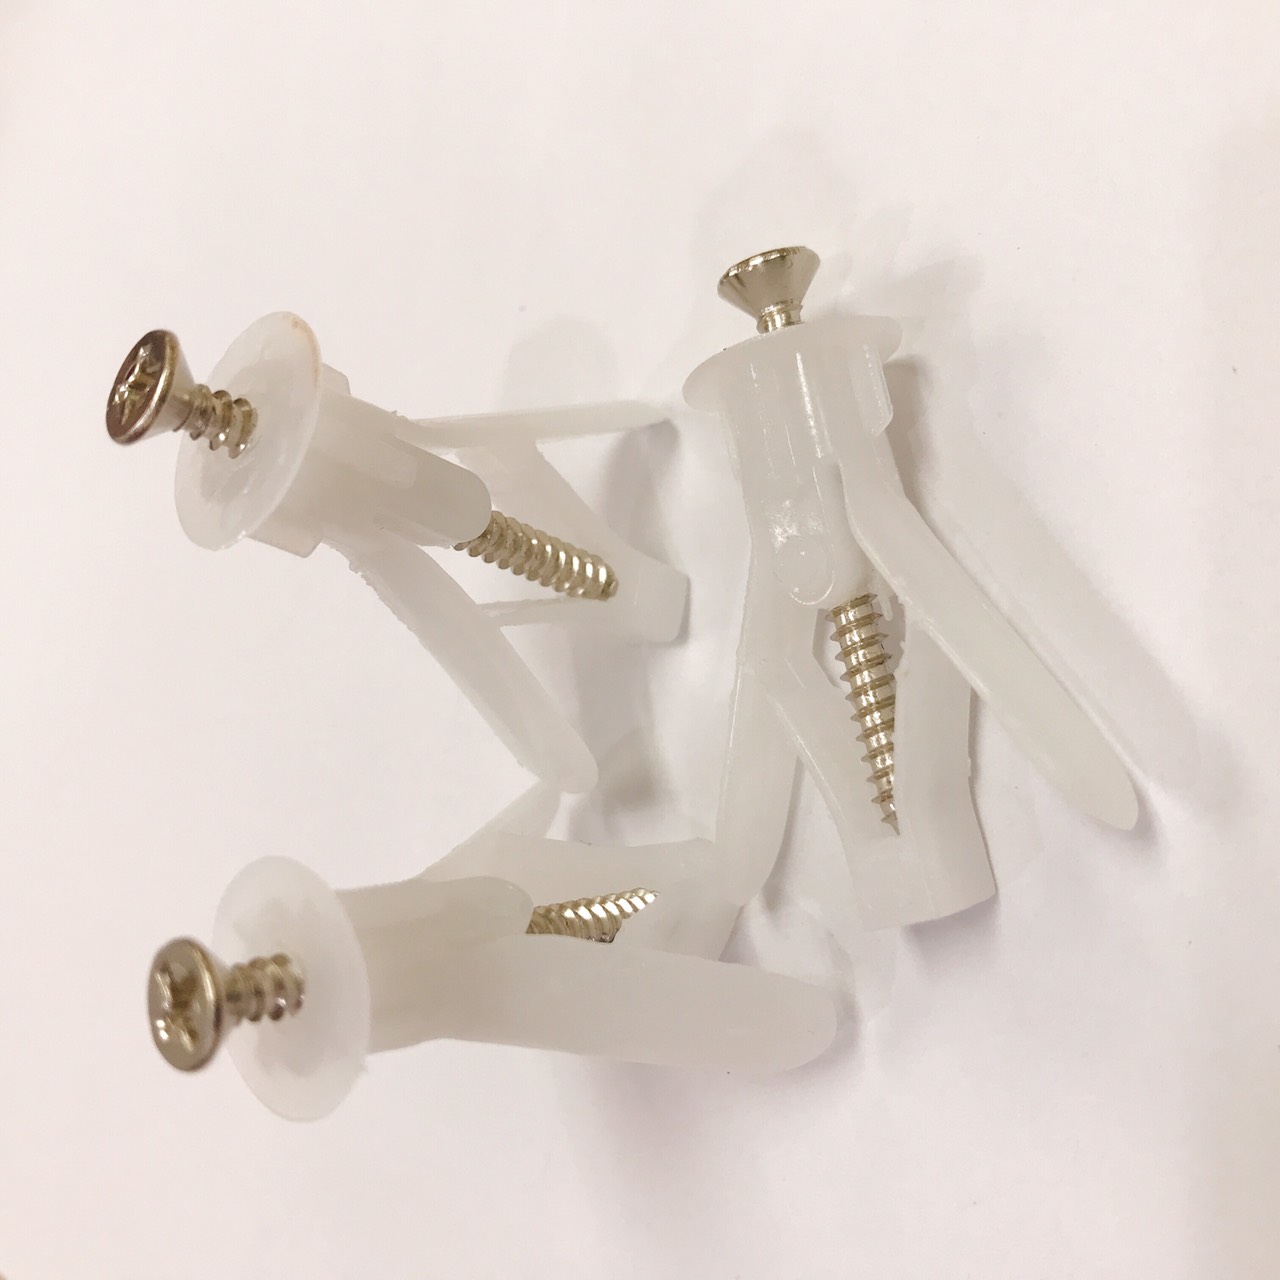 hanging heavy stuffs on wall -Butterfly-wing plastic expansion bolt with screw